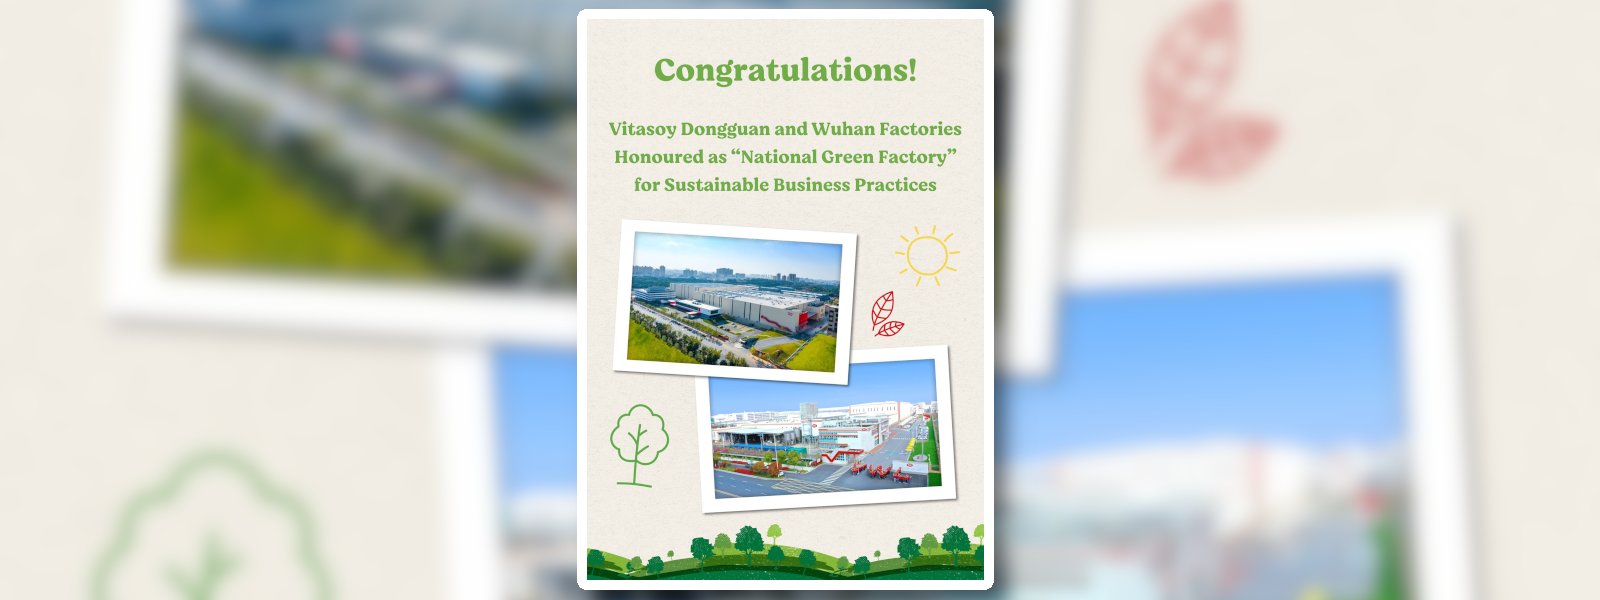 Vitasoy’s Factories Honoured as “National Green Factory” in Mainland China for Sustainable Business Practices